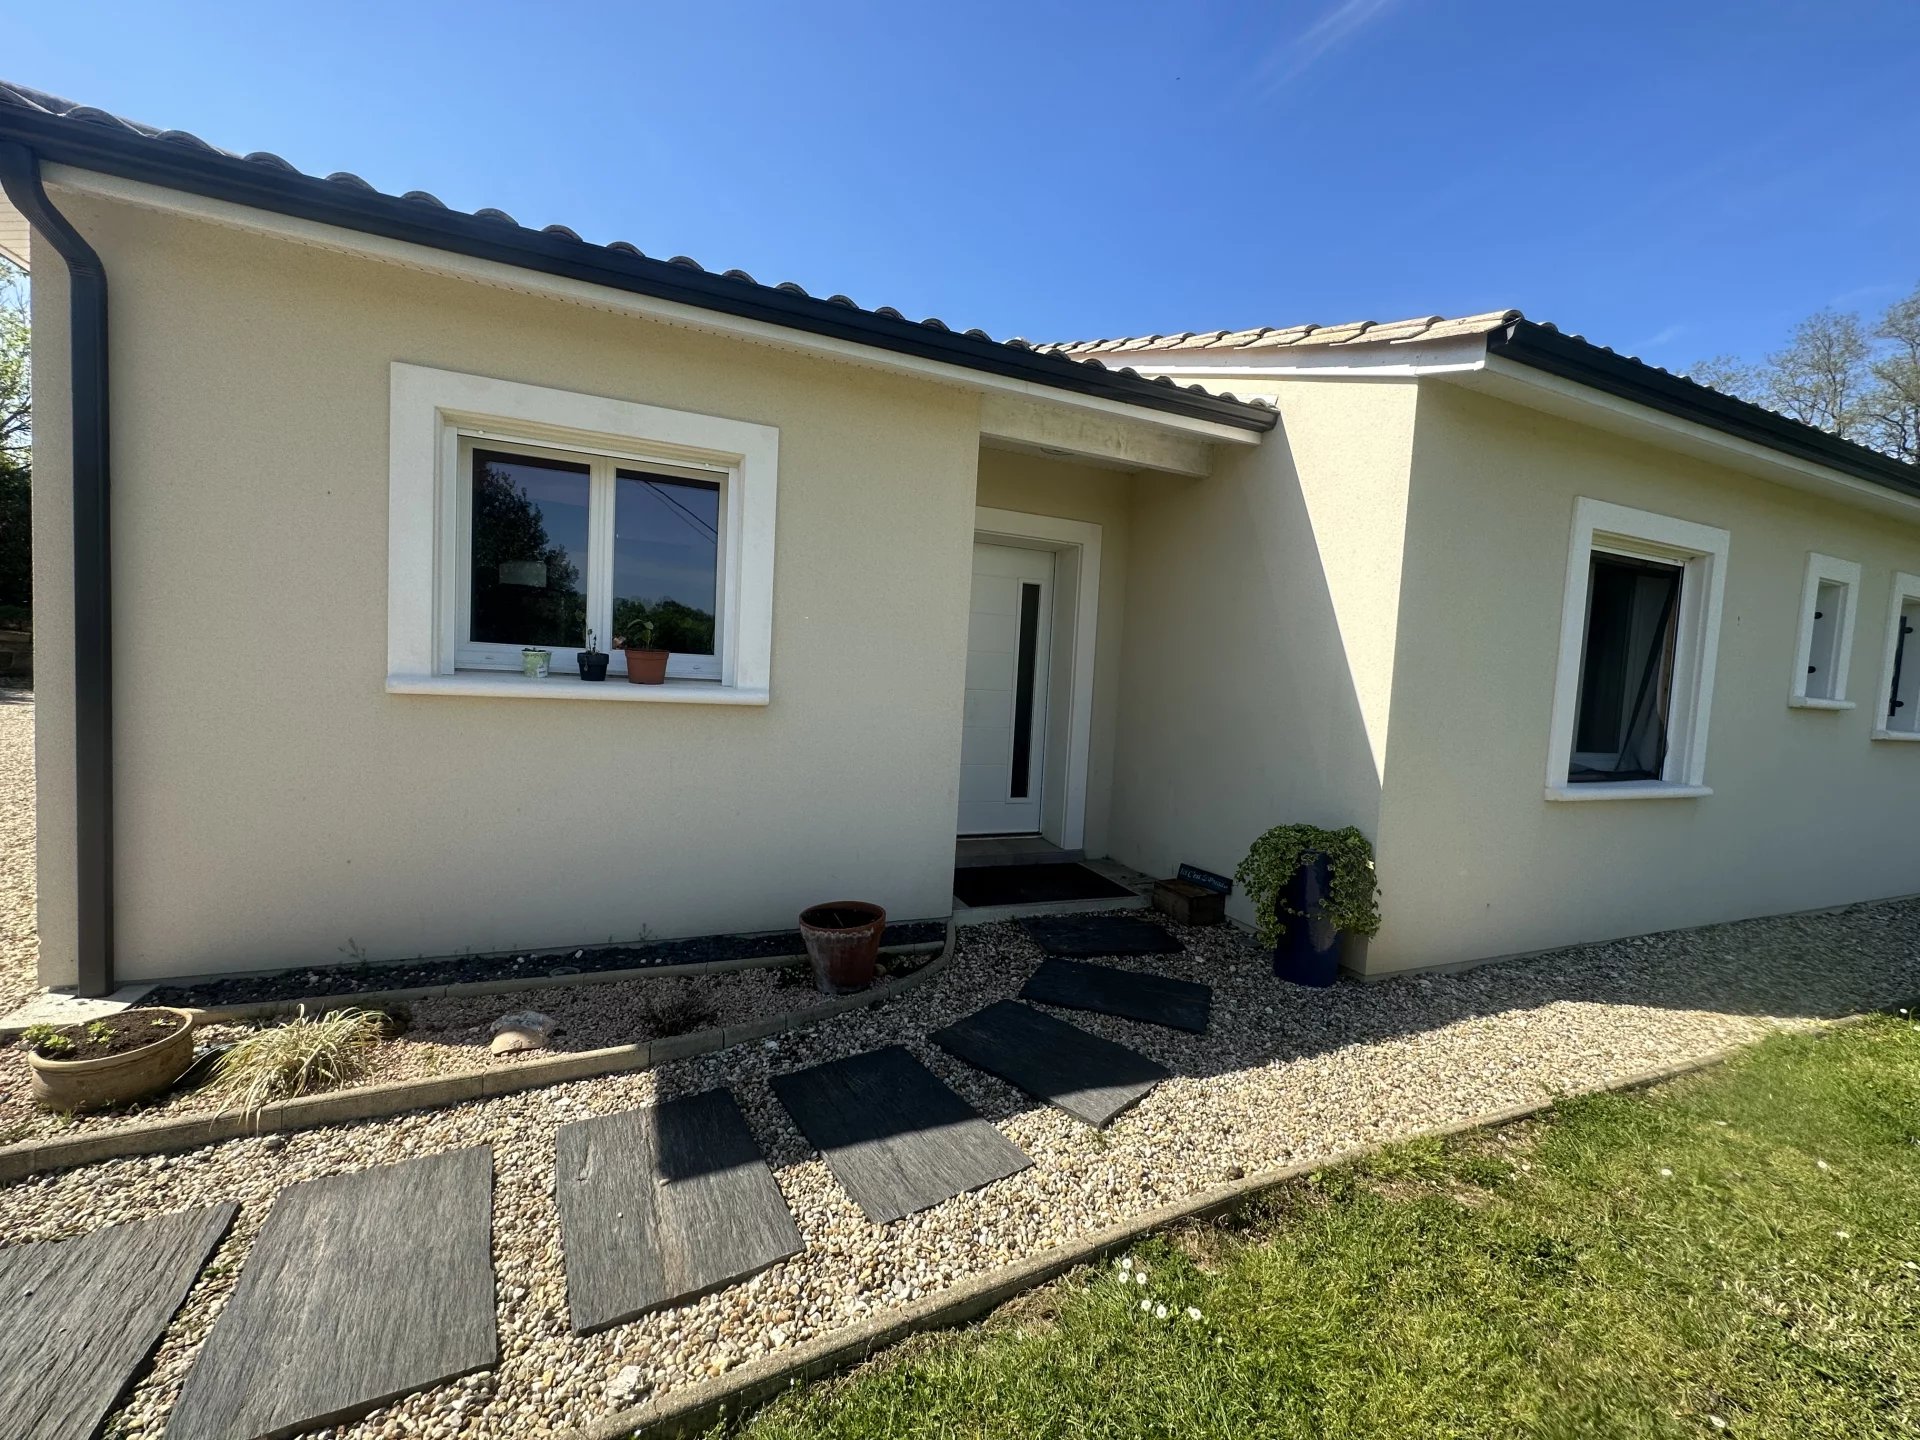 3 Bed Bungalow with spacious living area, office and guesthouse